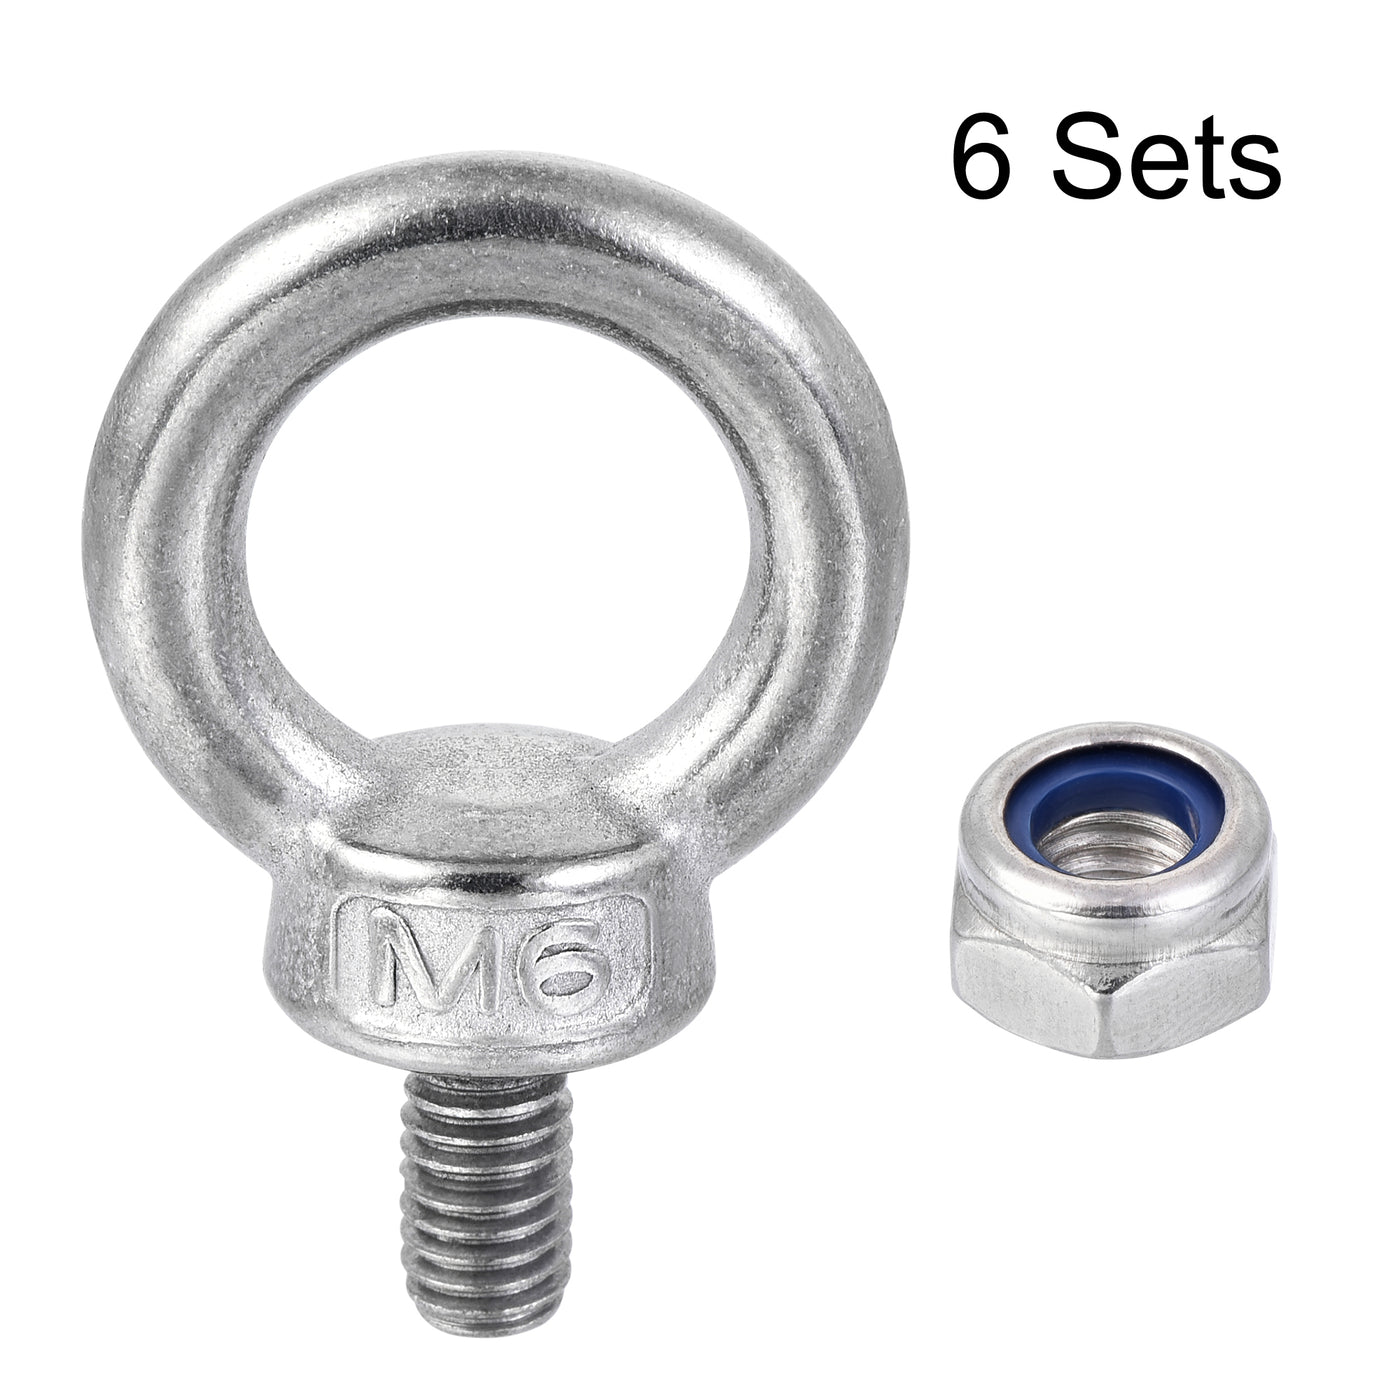 uxcell Uxcell Lifting Eye Bolt M6 x 12mm Male Thread with Hex Screw Nut for Hanging, 304 Stainless Steel, 6 Sets